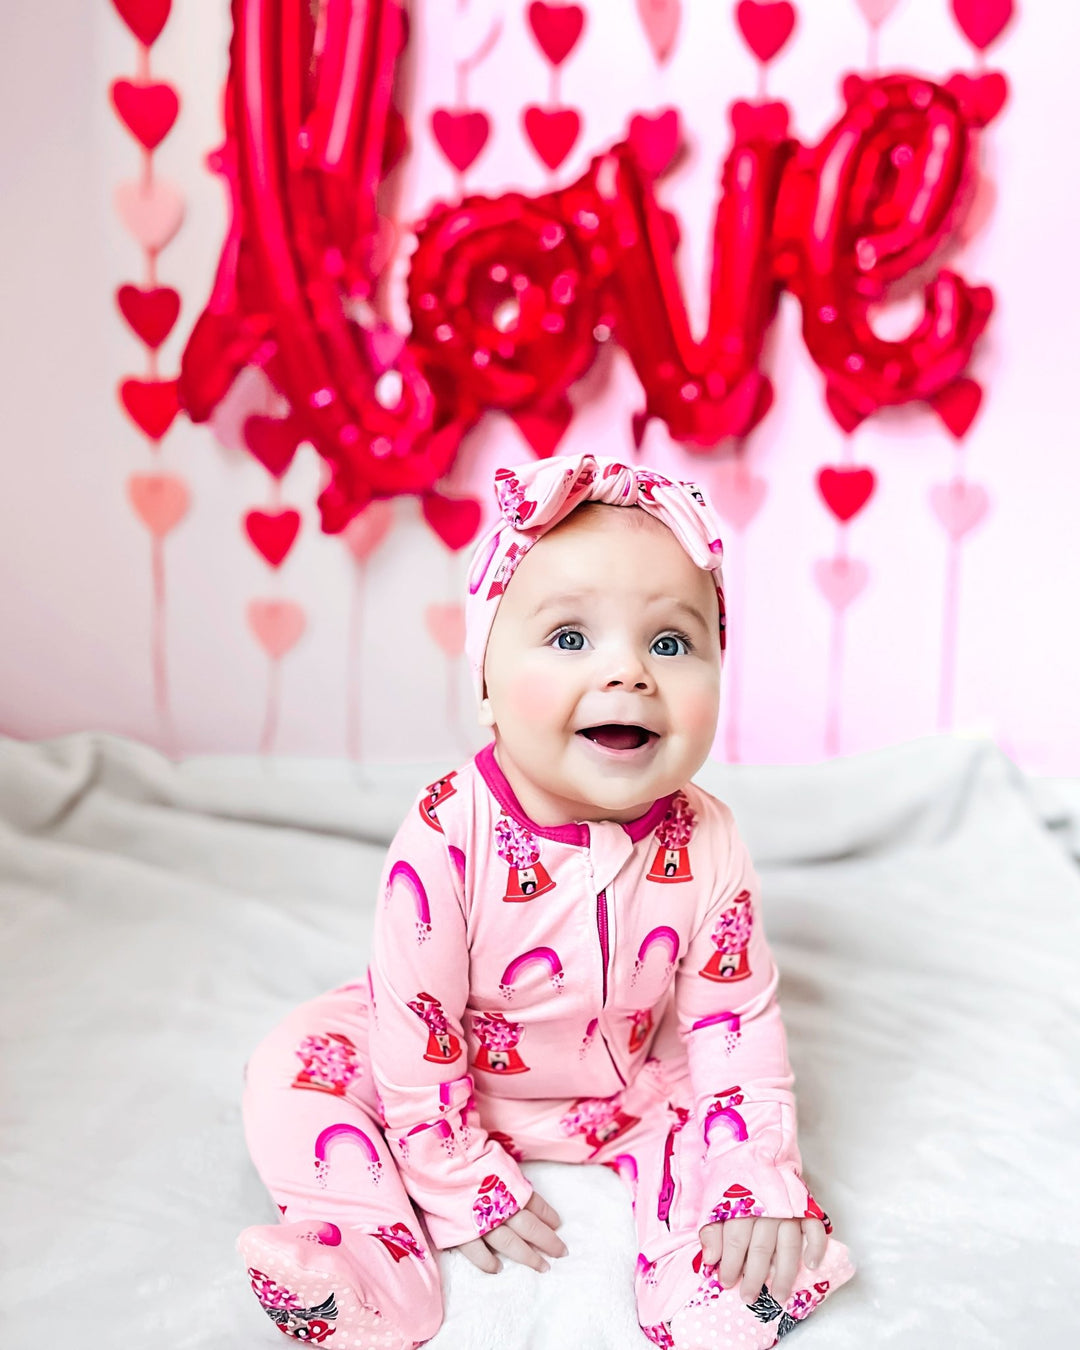 Painted Heart Gumballs Coverall (2T-3T)